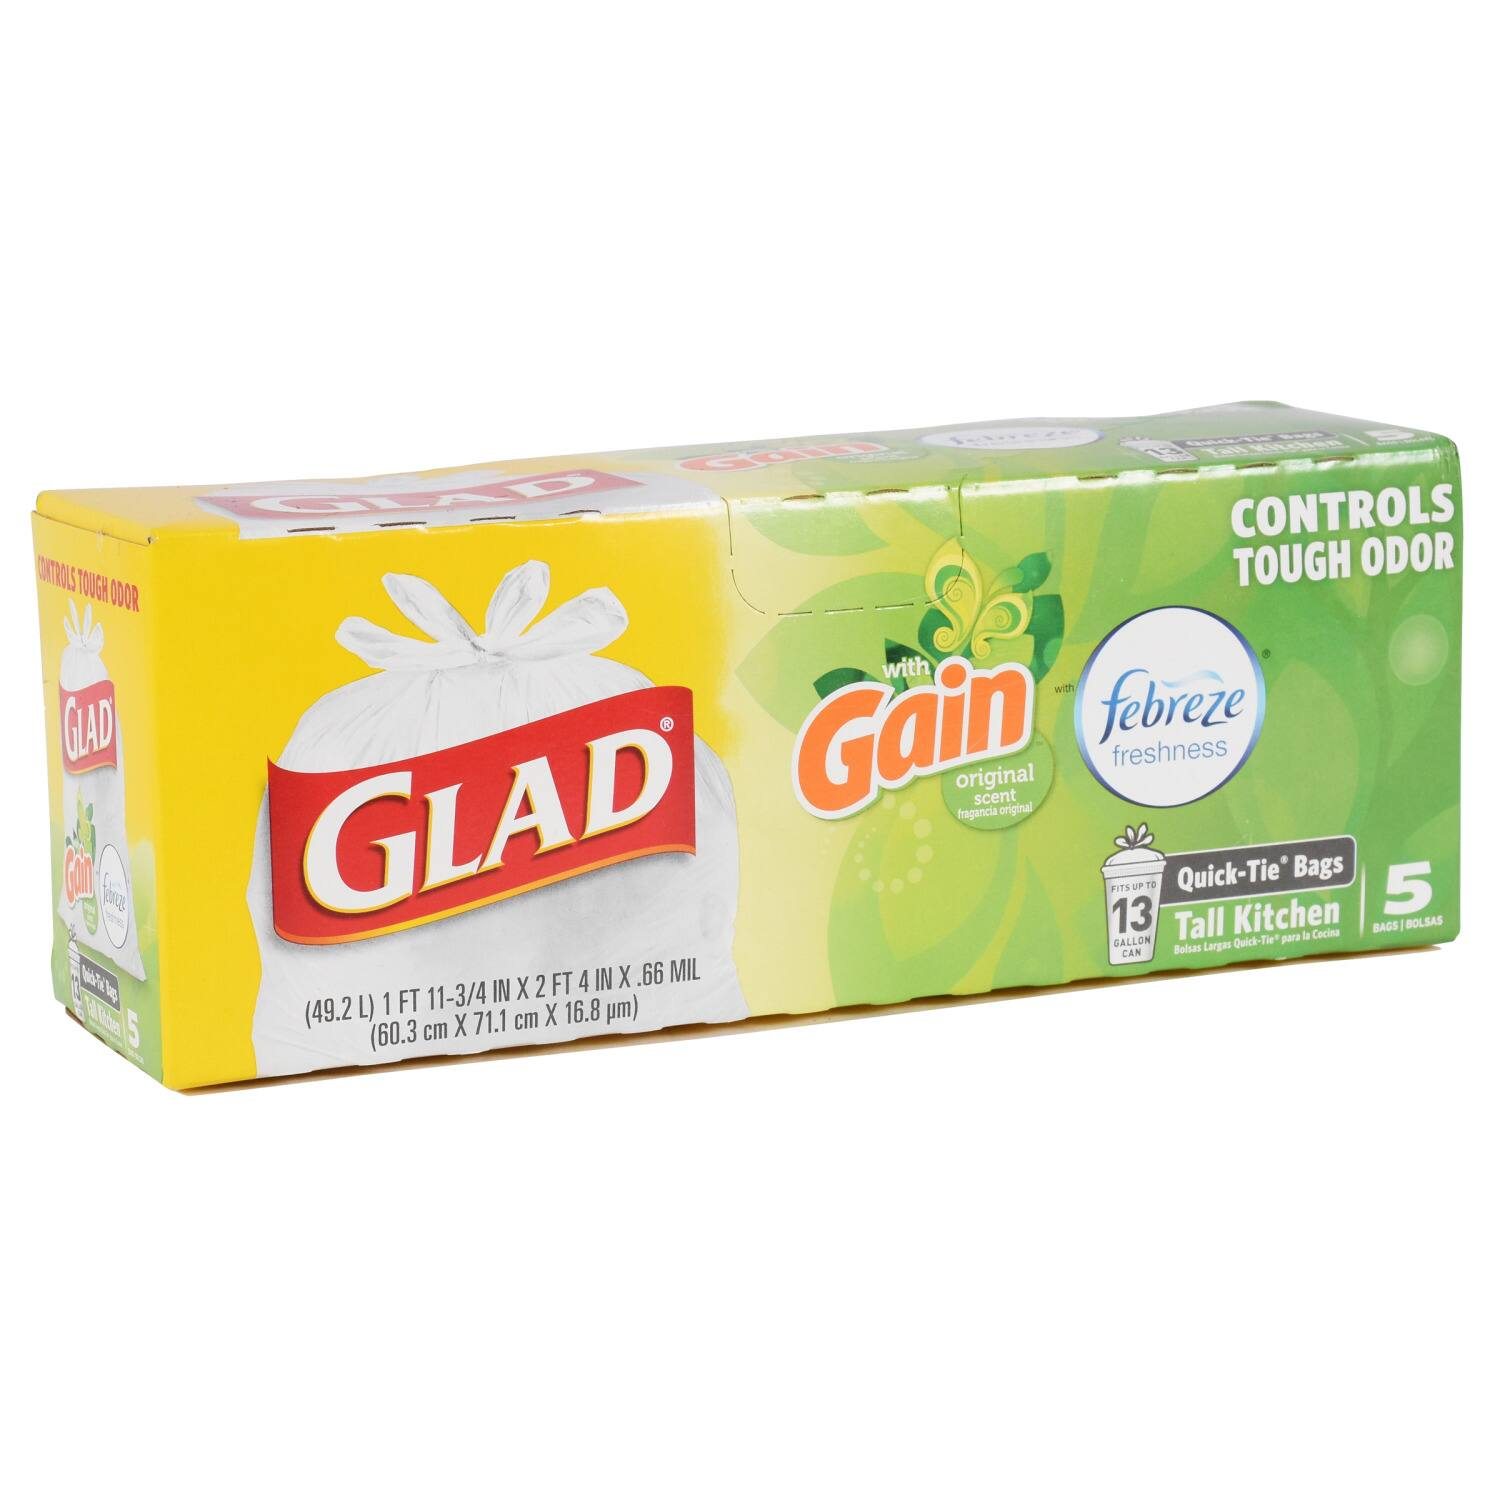 Glad Odor Neutralizing 13-Gallon Kitchen Trash Bags with Febreze, 5-ct. Boxes